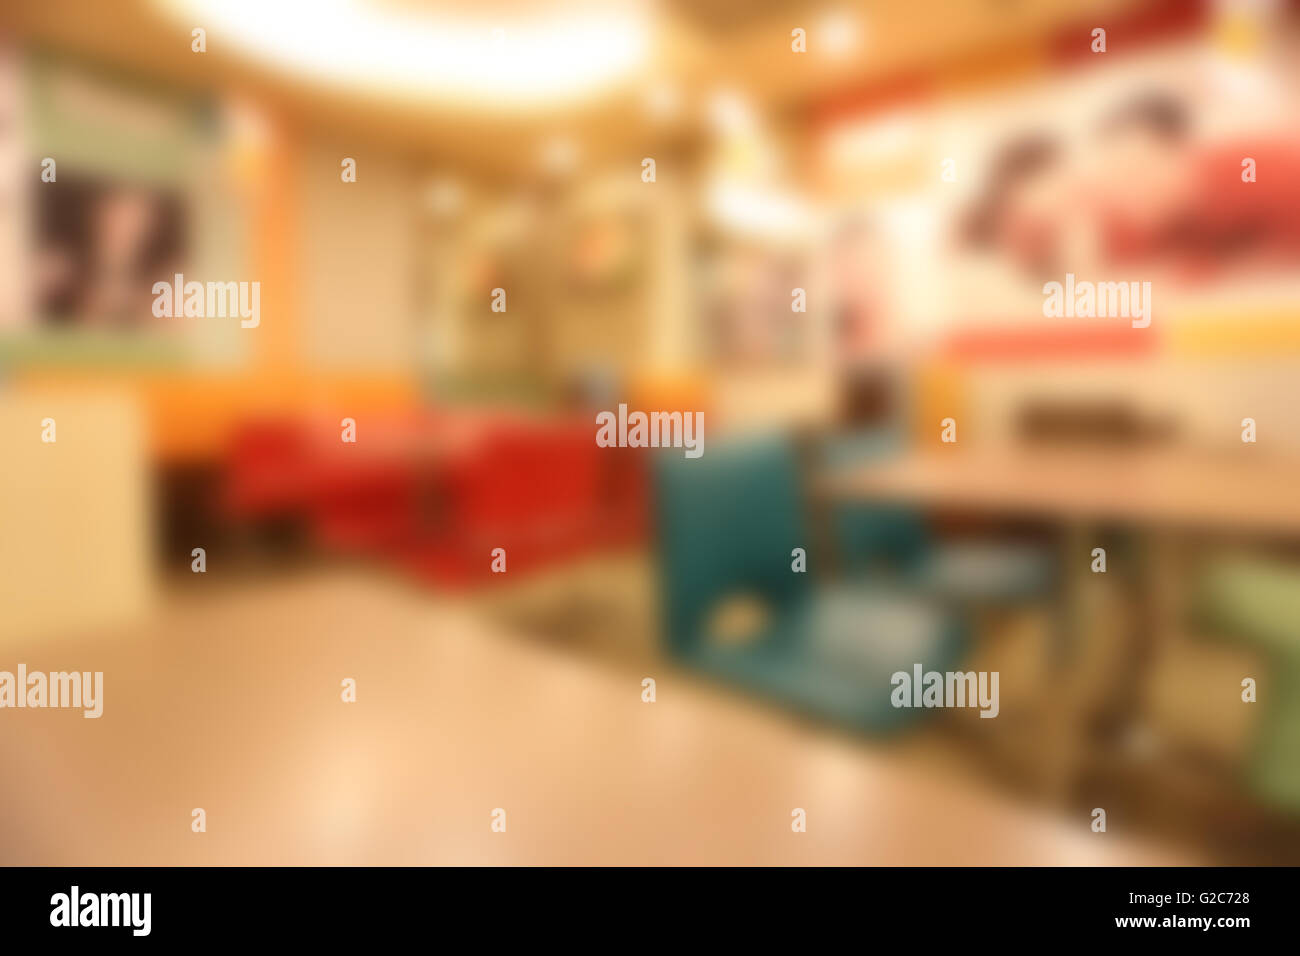 Coffee shop in a blur style for the background image. Stock Photo